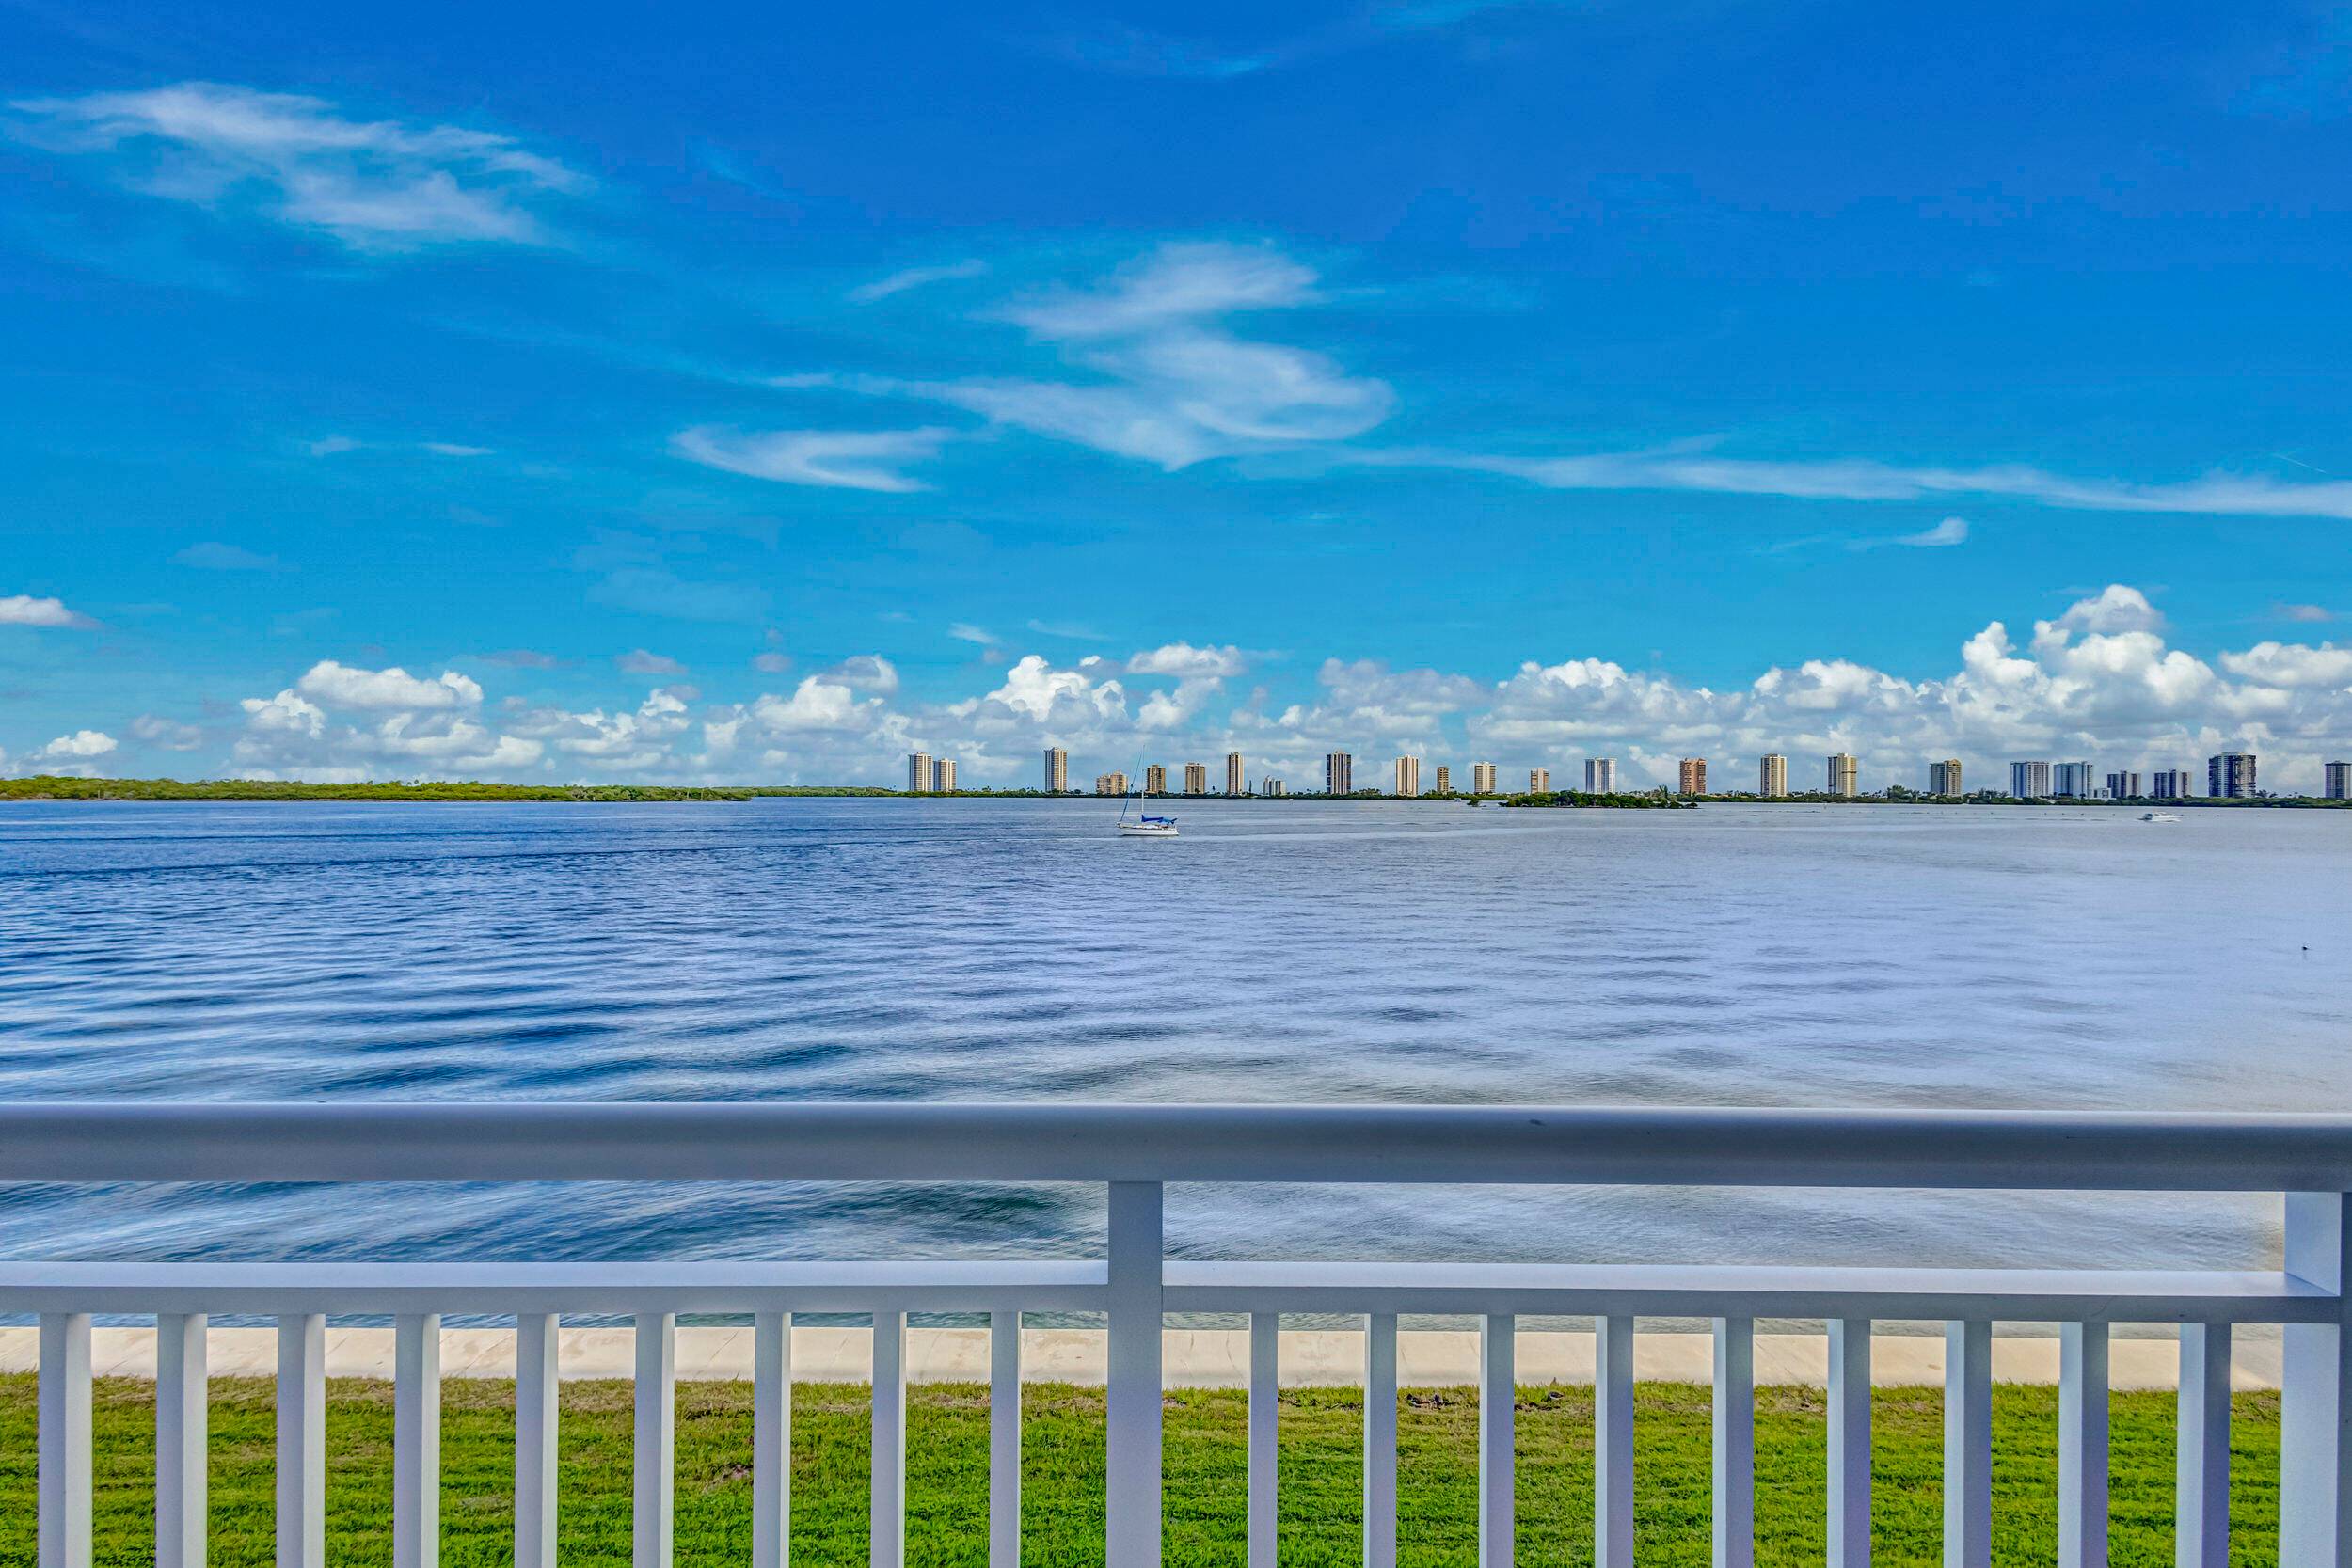 Unit screened porch looks directly at the intracoastal waterway.